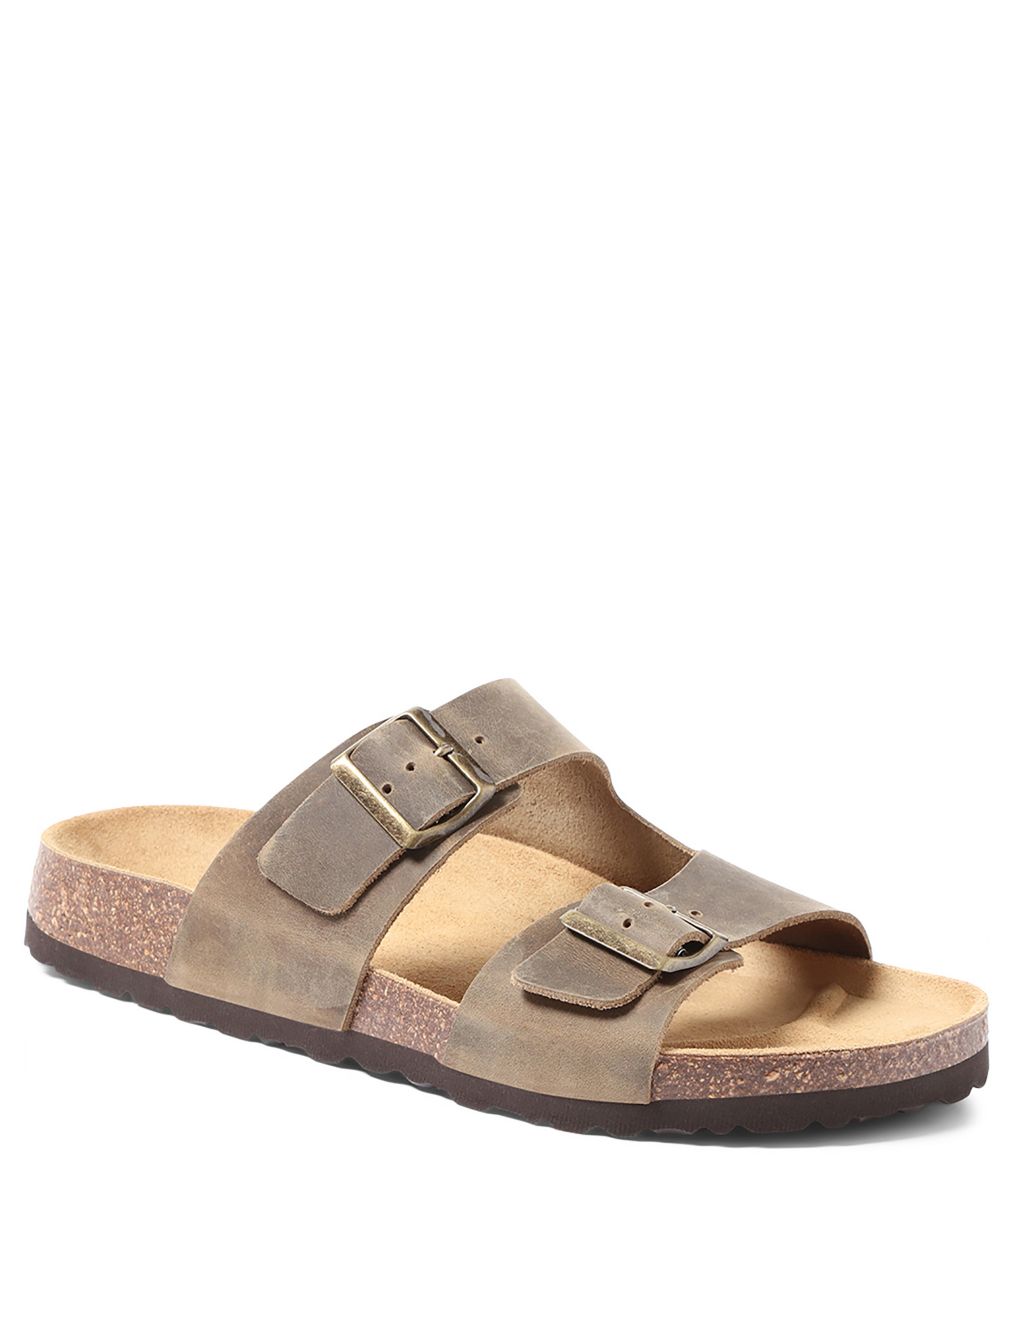 Leather Slip-On Sandals 1 of 5